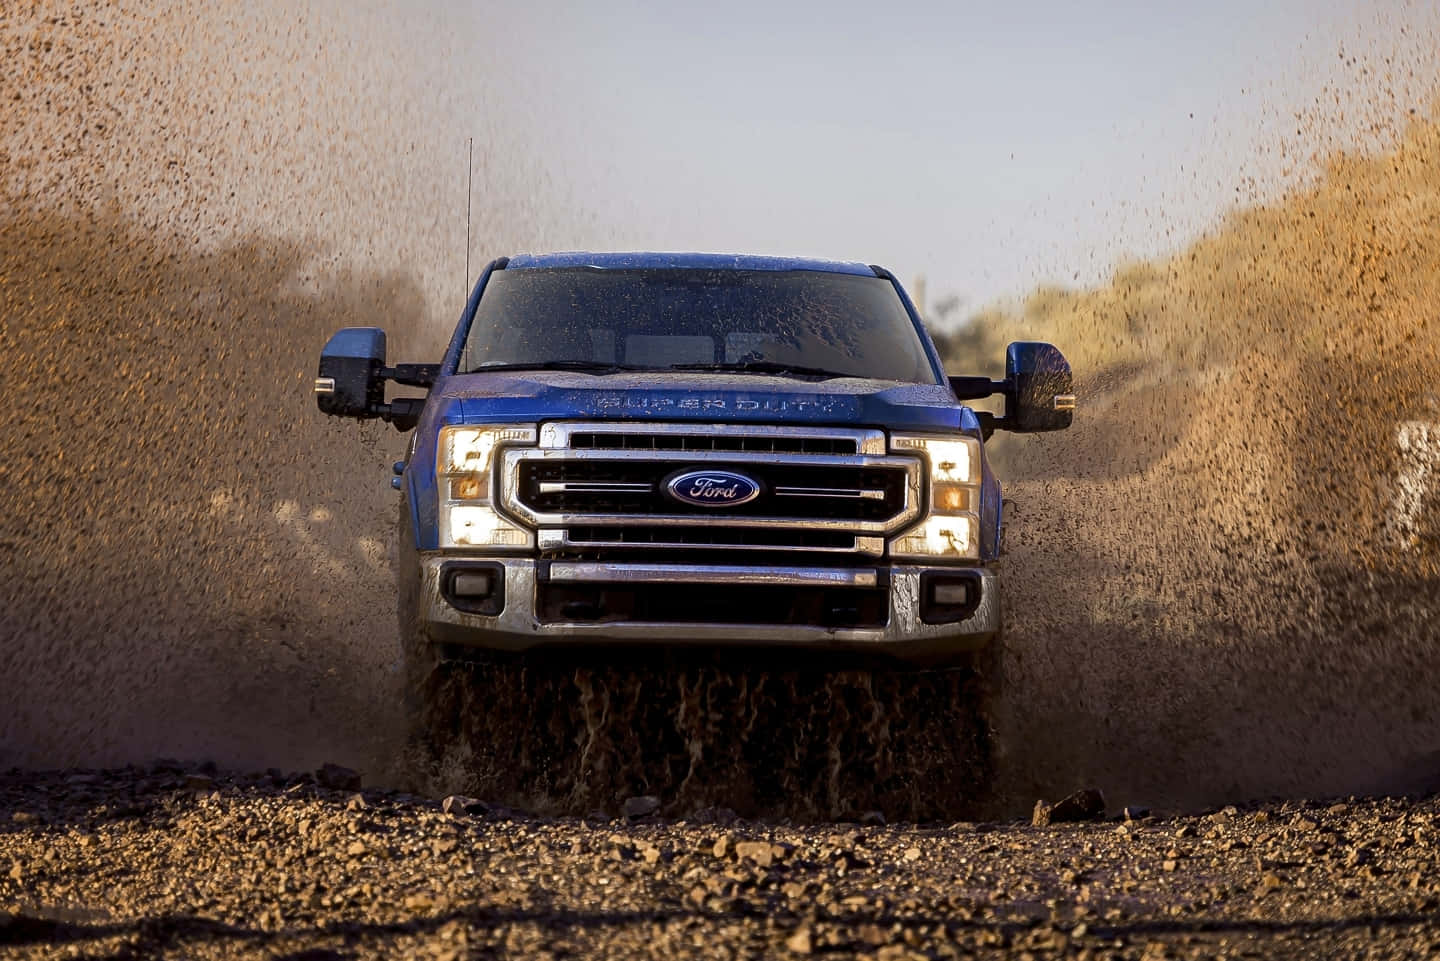 "Ford Vehicles: Quality, Durability and Style"